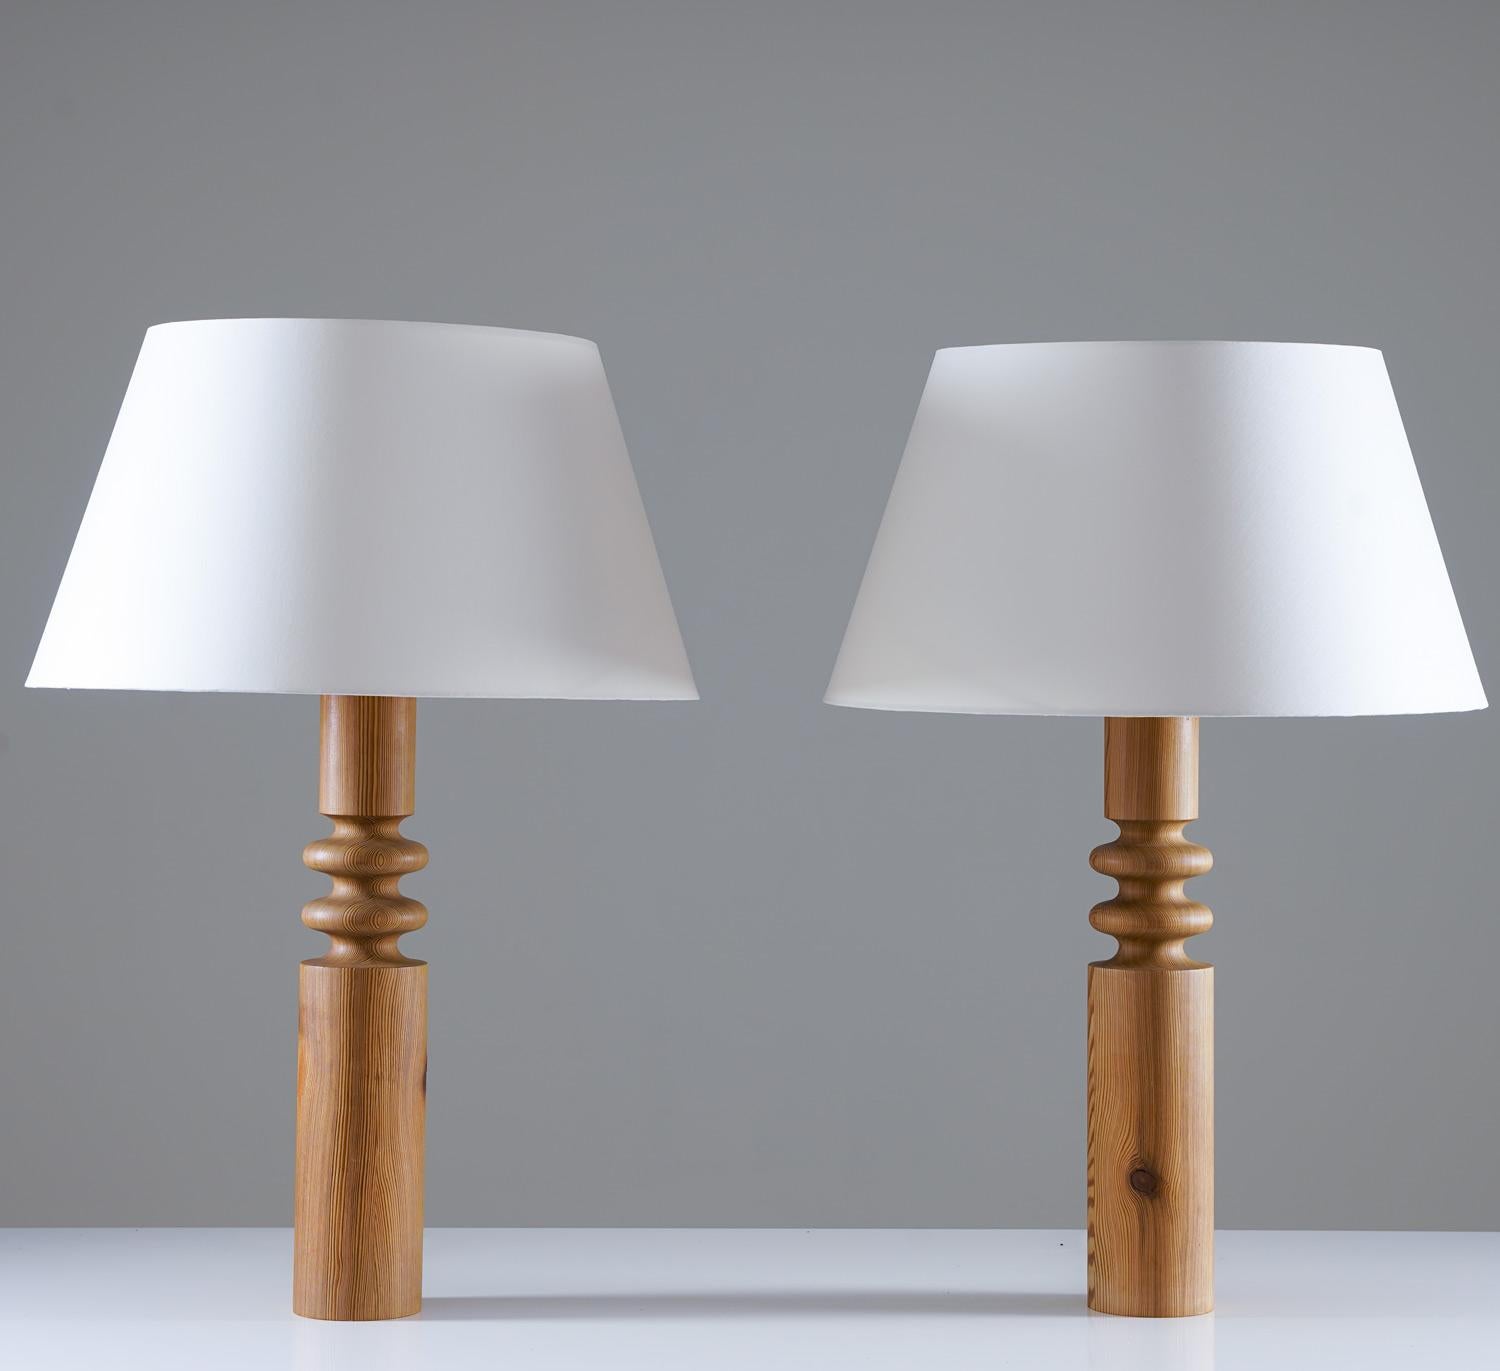 Set of two large table lamps by Östen Kristiansson for Luxus, Sweden, 1970s.
The lamps consist of a base of turned pine, that have aged beautifully. 
The lamps come with new high-quality shades in off-white satin fabric.

Condition: Very good